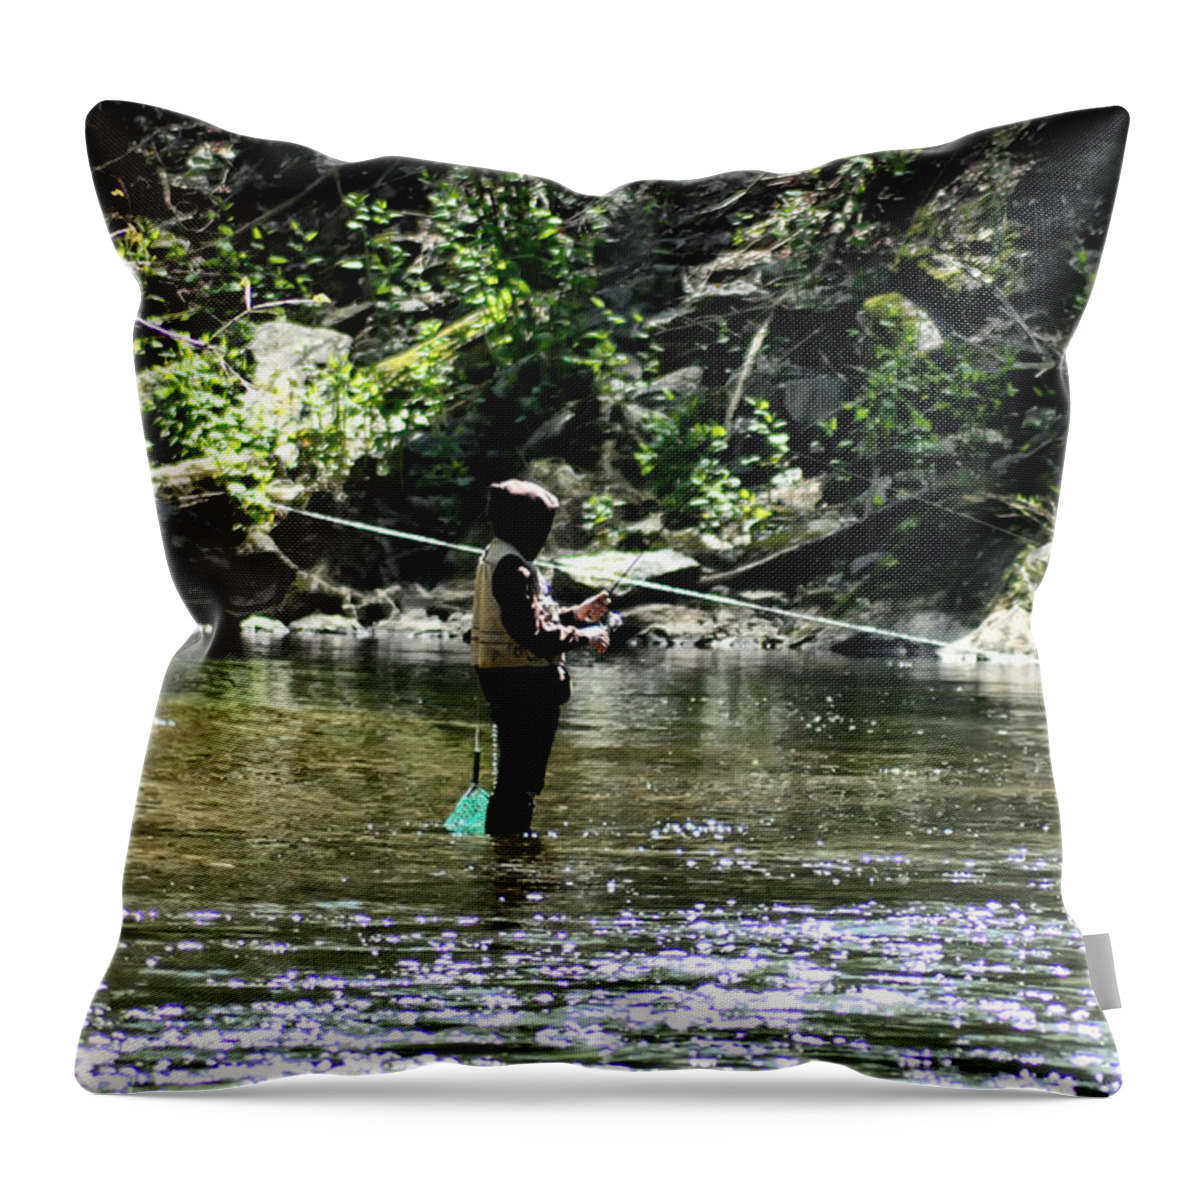 Fishing The Wissahickon Throw Pillow featuring the photograph Fishing the Wissahickon by Bill Cannon